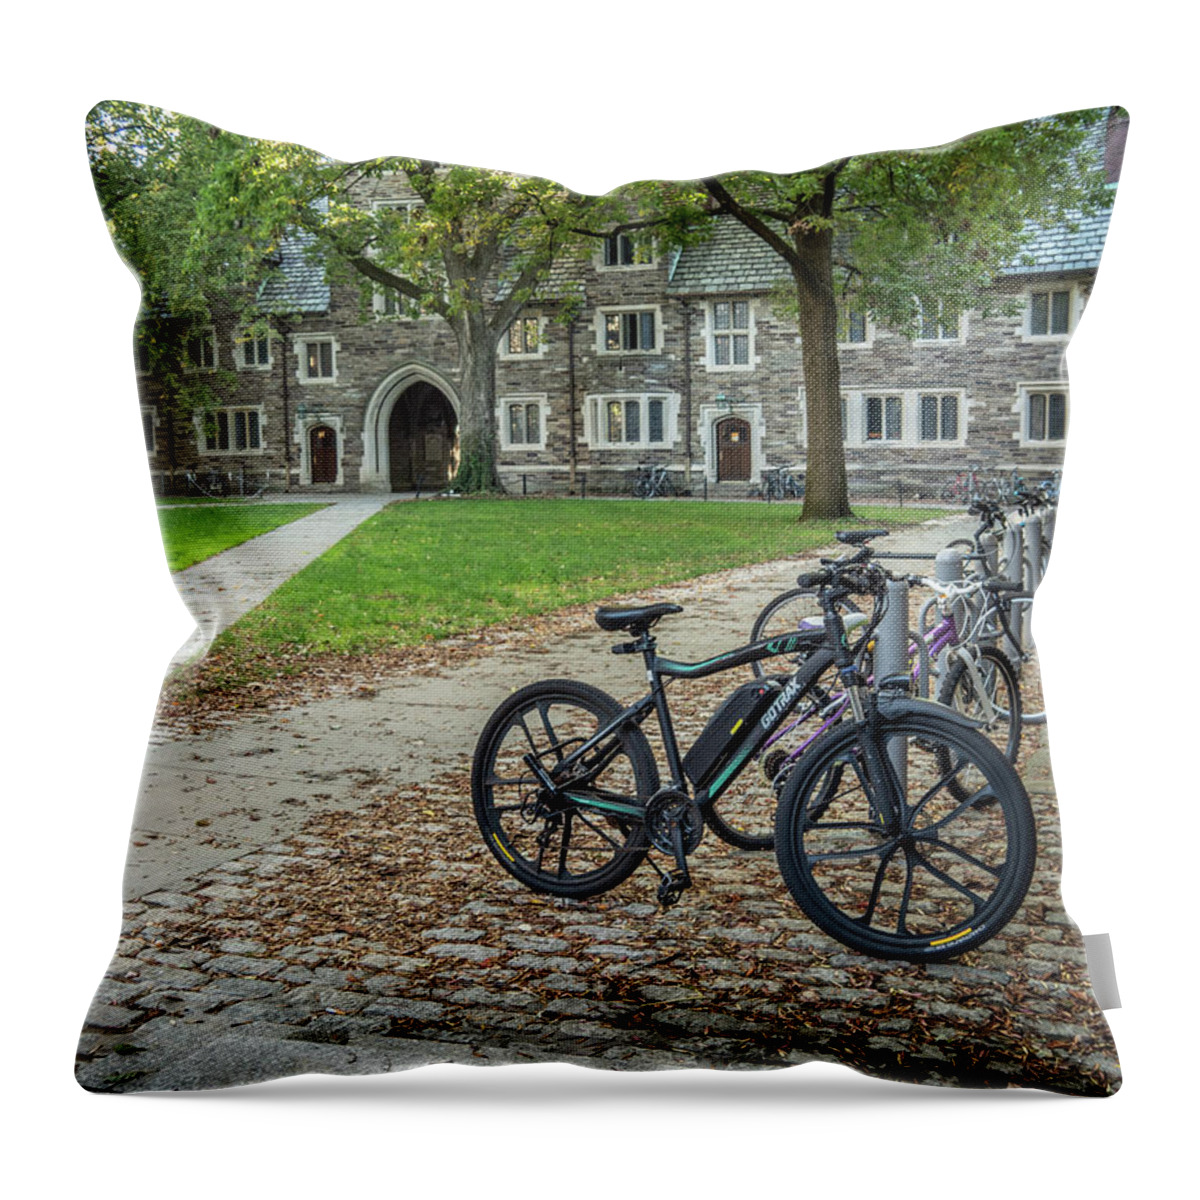 New Jersey Throw Pillow featuring the photograph Bikes At Princeton University by Kristia Adams